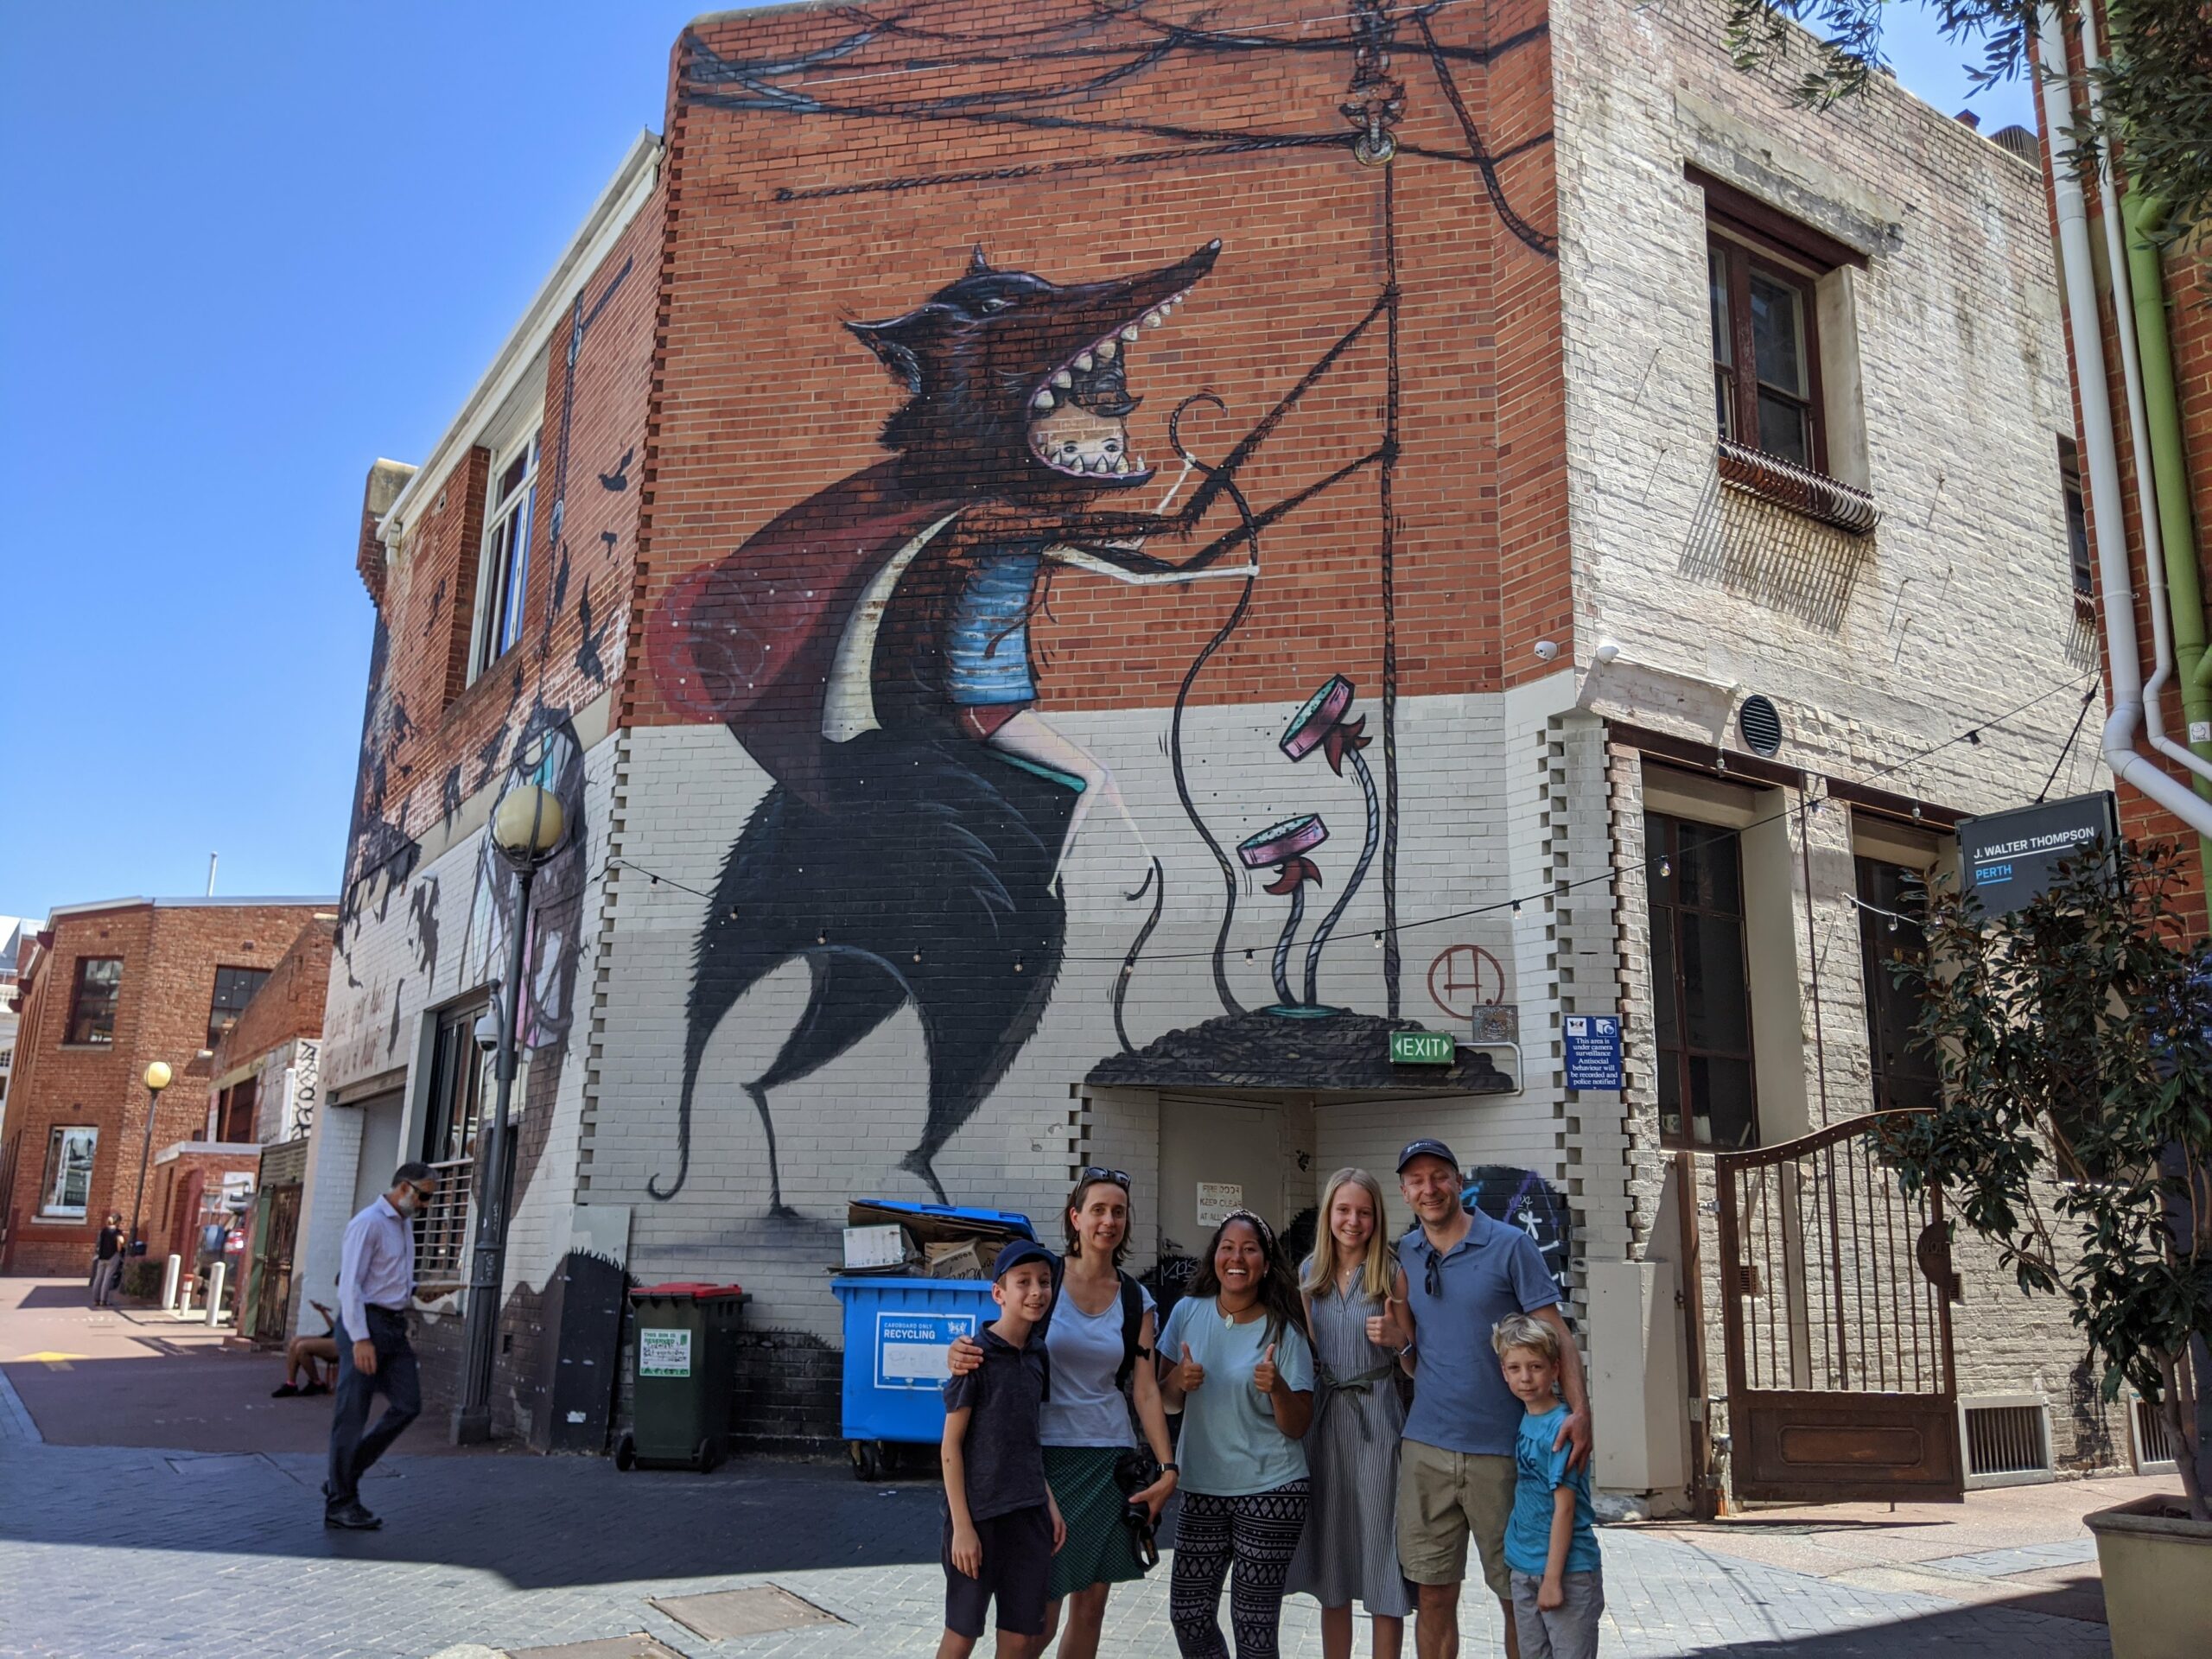 The ULTIMATE Perth Walking Tour: History, Architecture, Art, Nightlife + More!